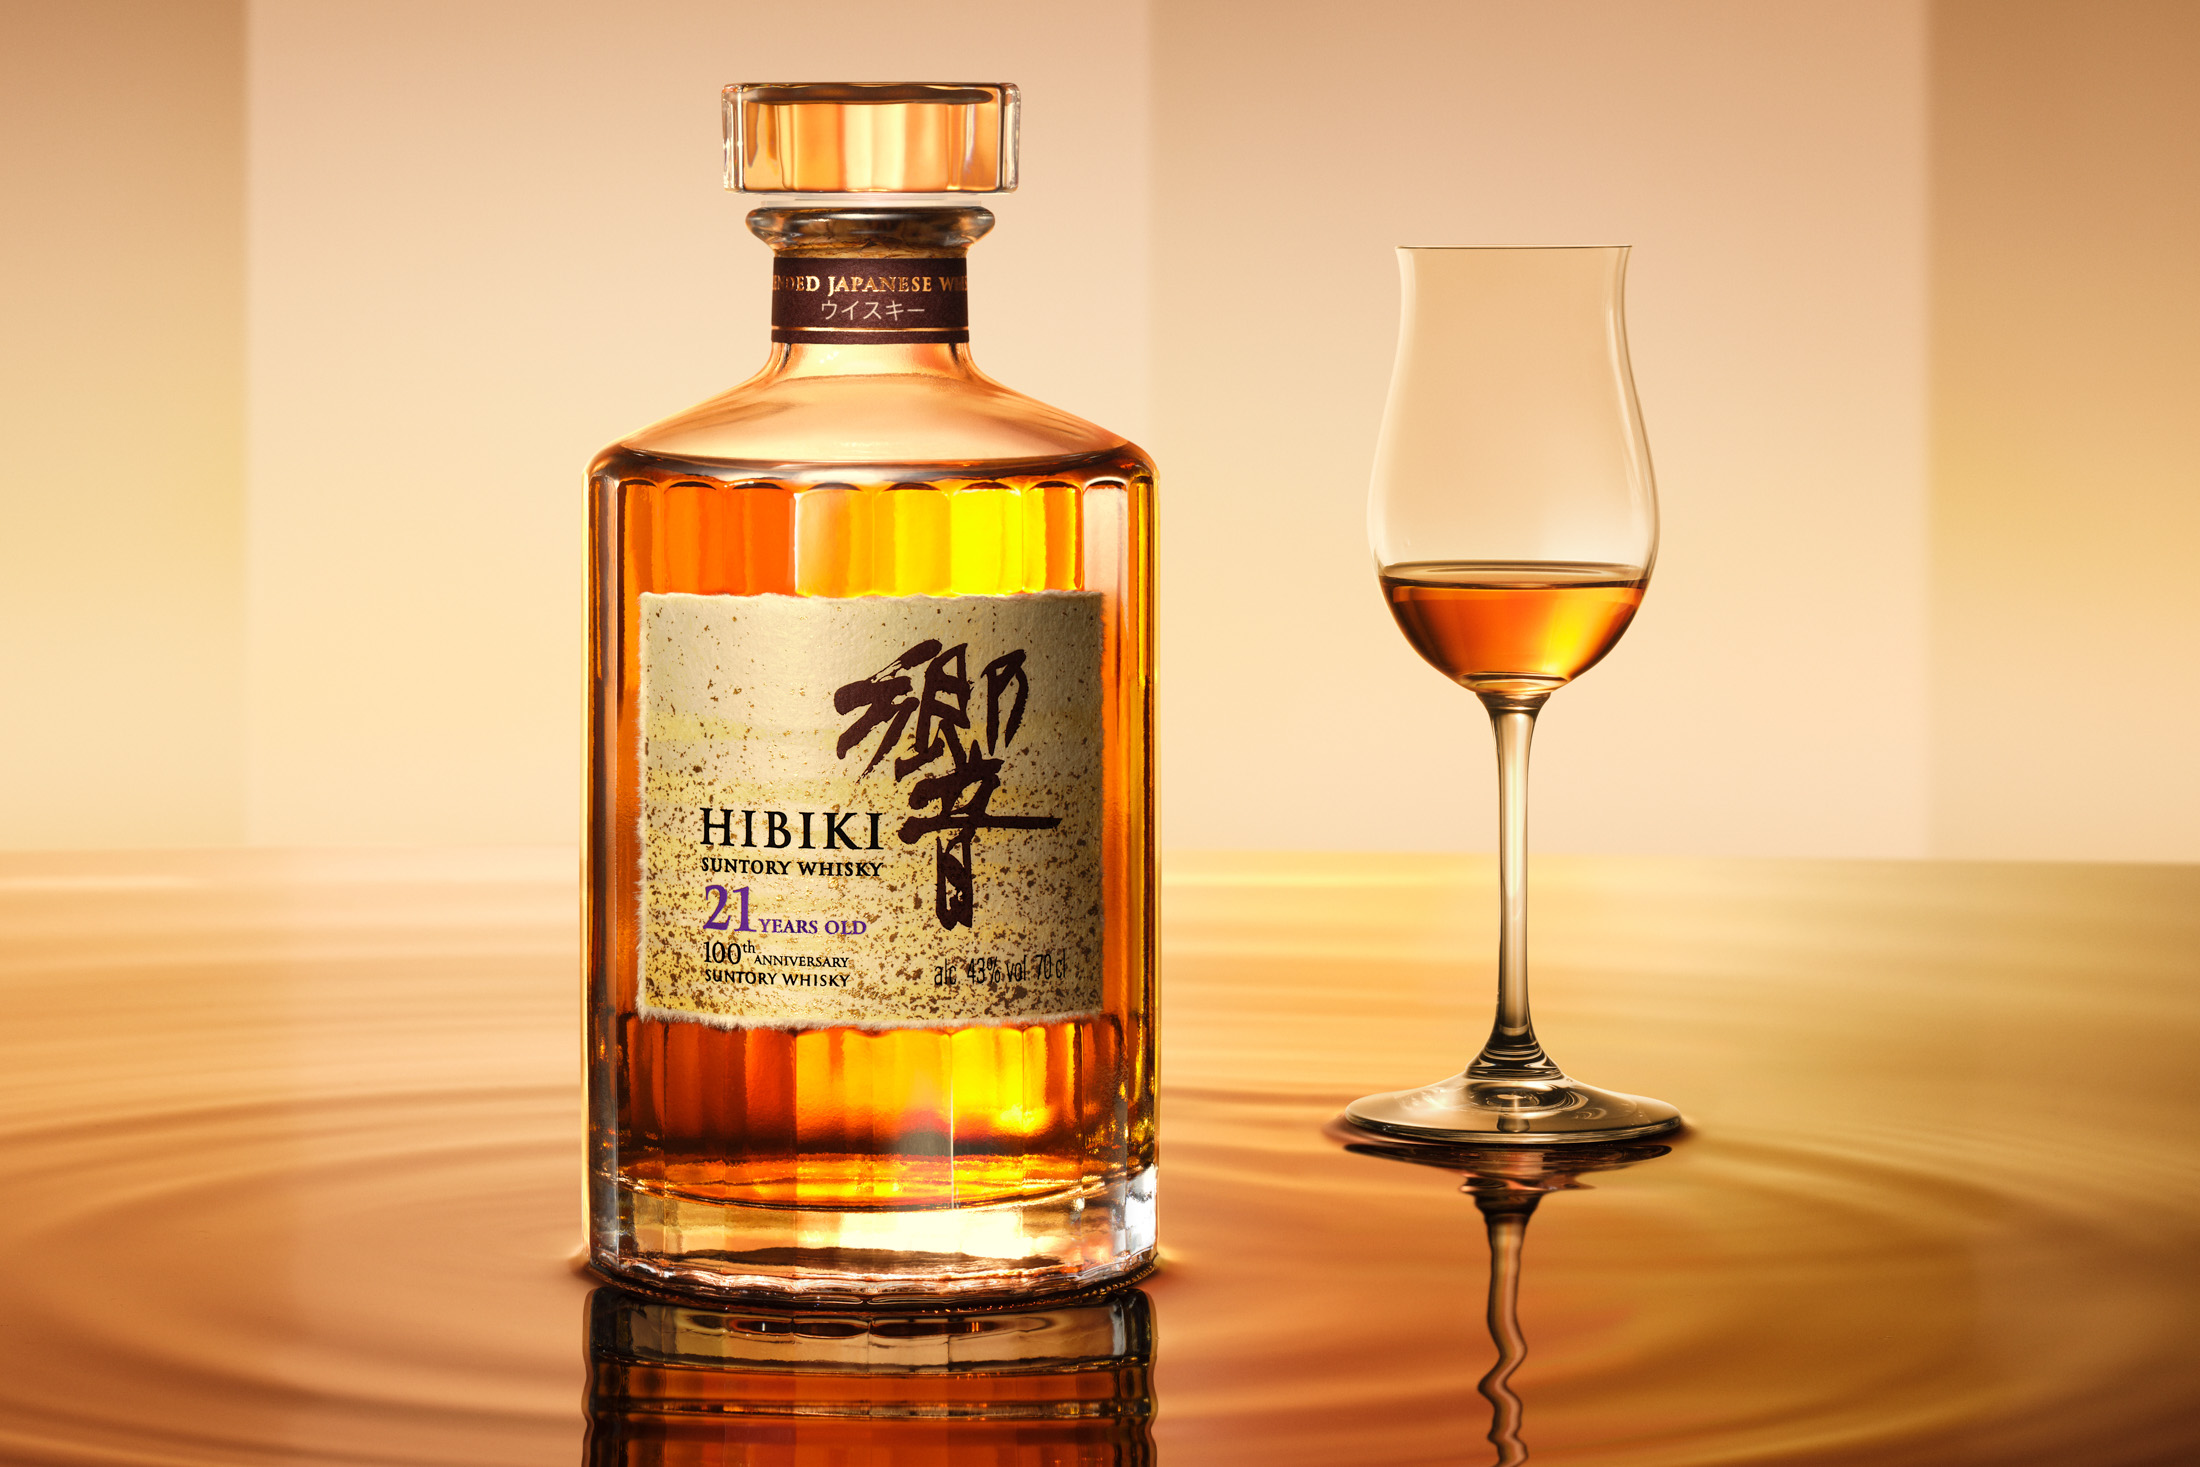 21 Year Old is a masterful blend of Japanese whisky,